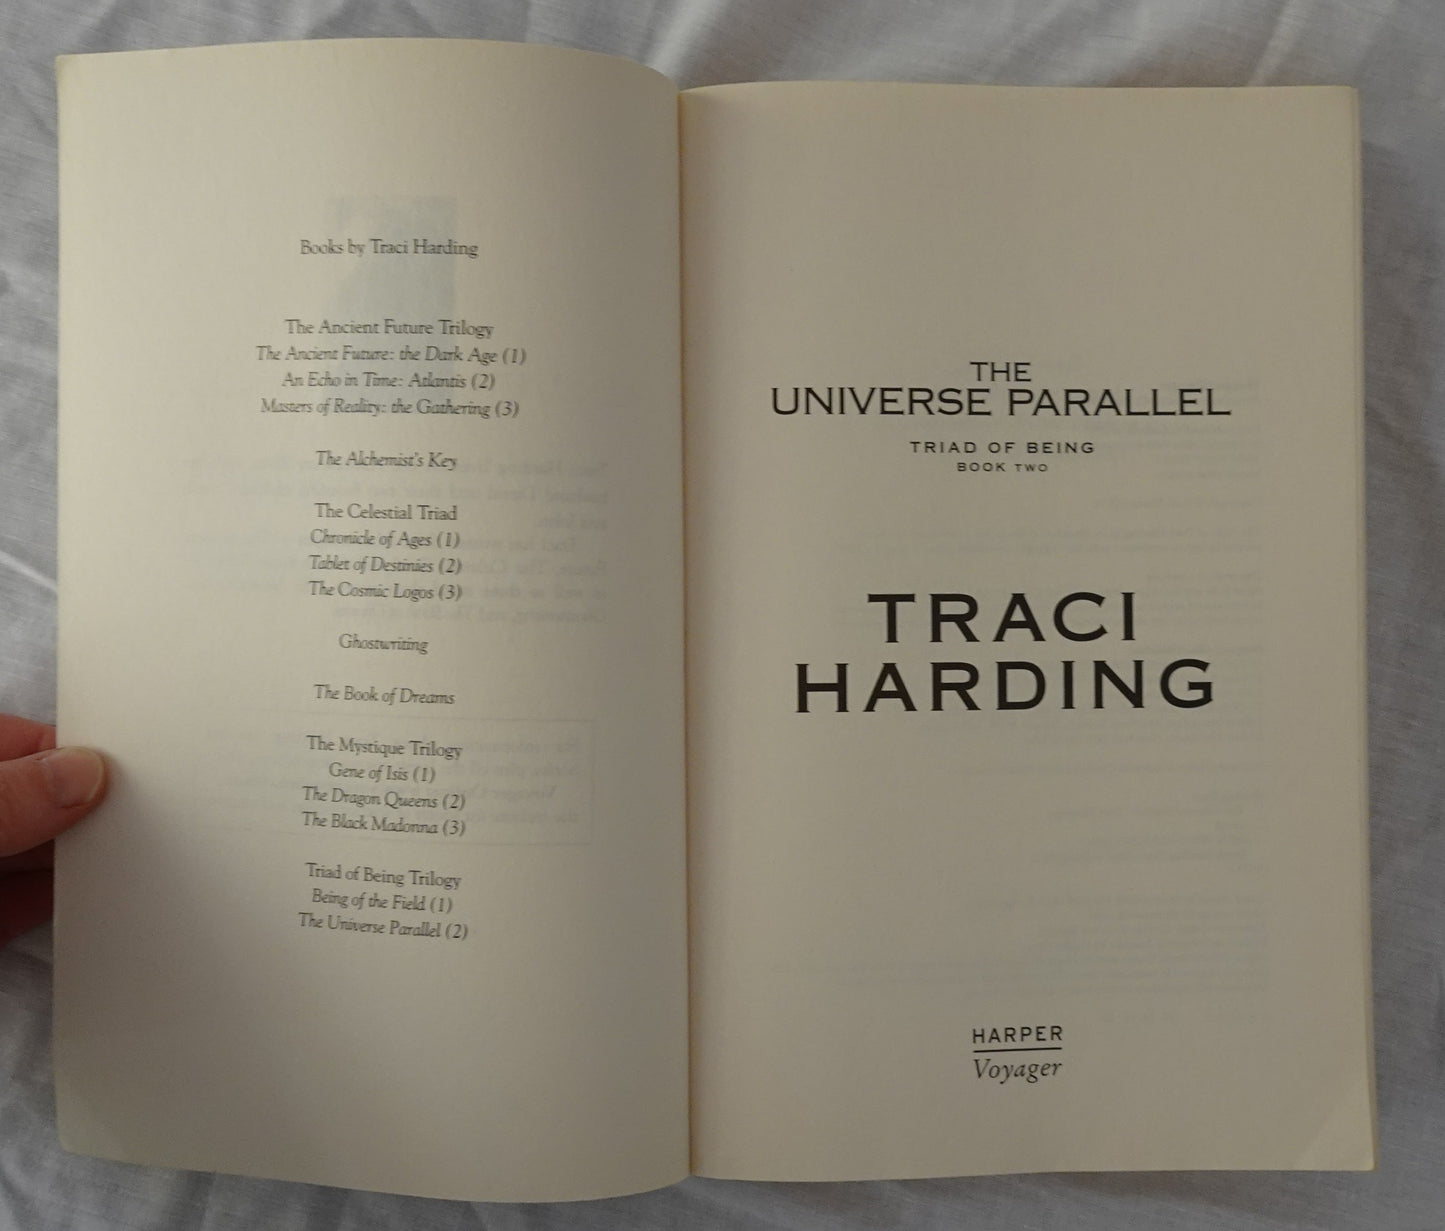 The Universe Parallel by Traci Harding